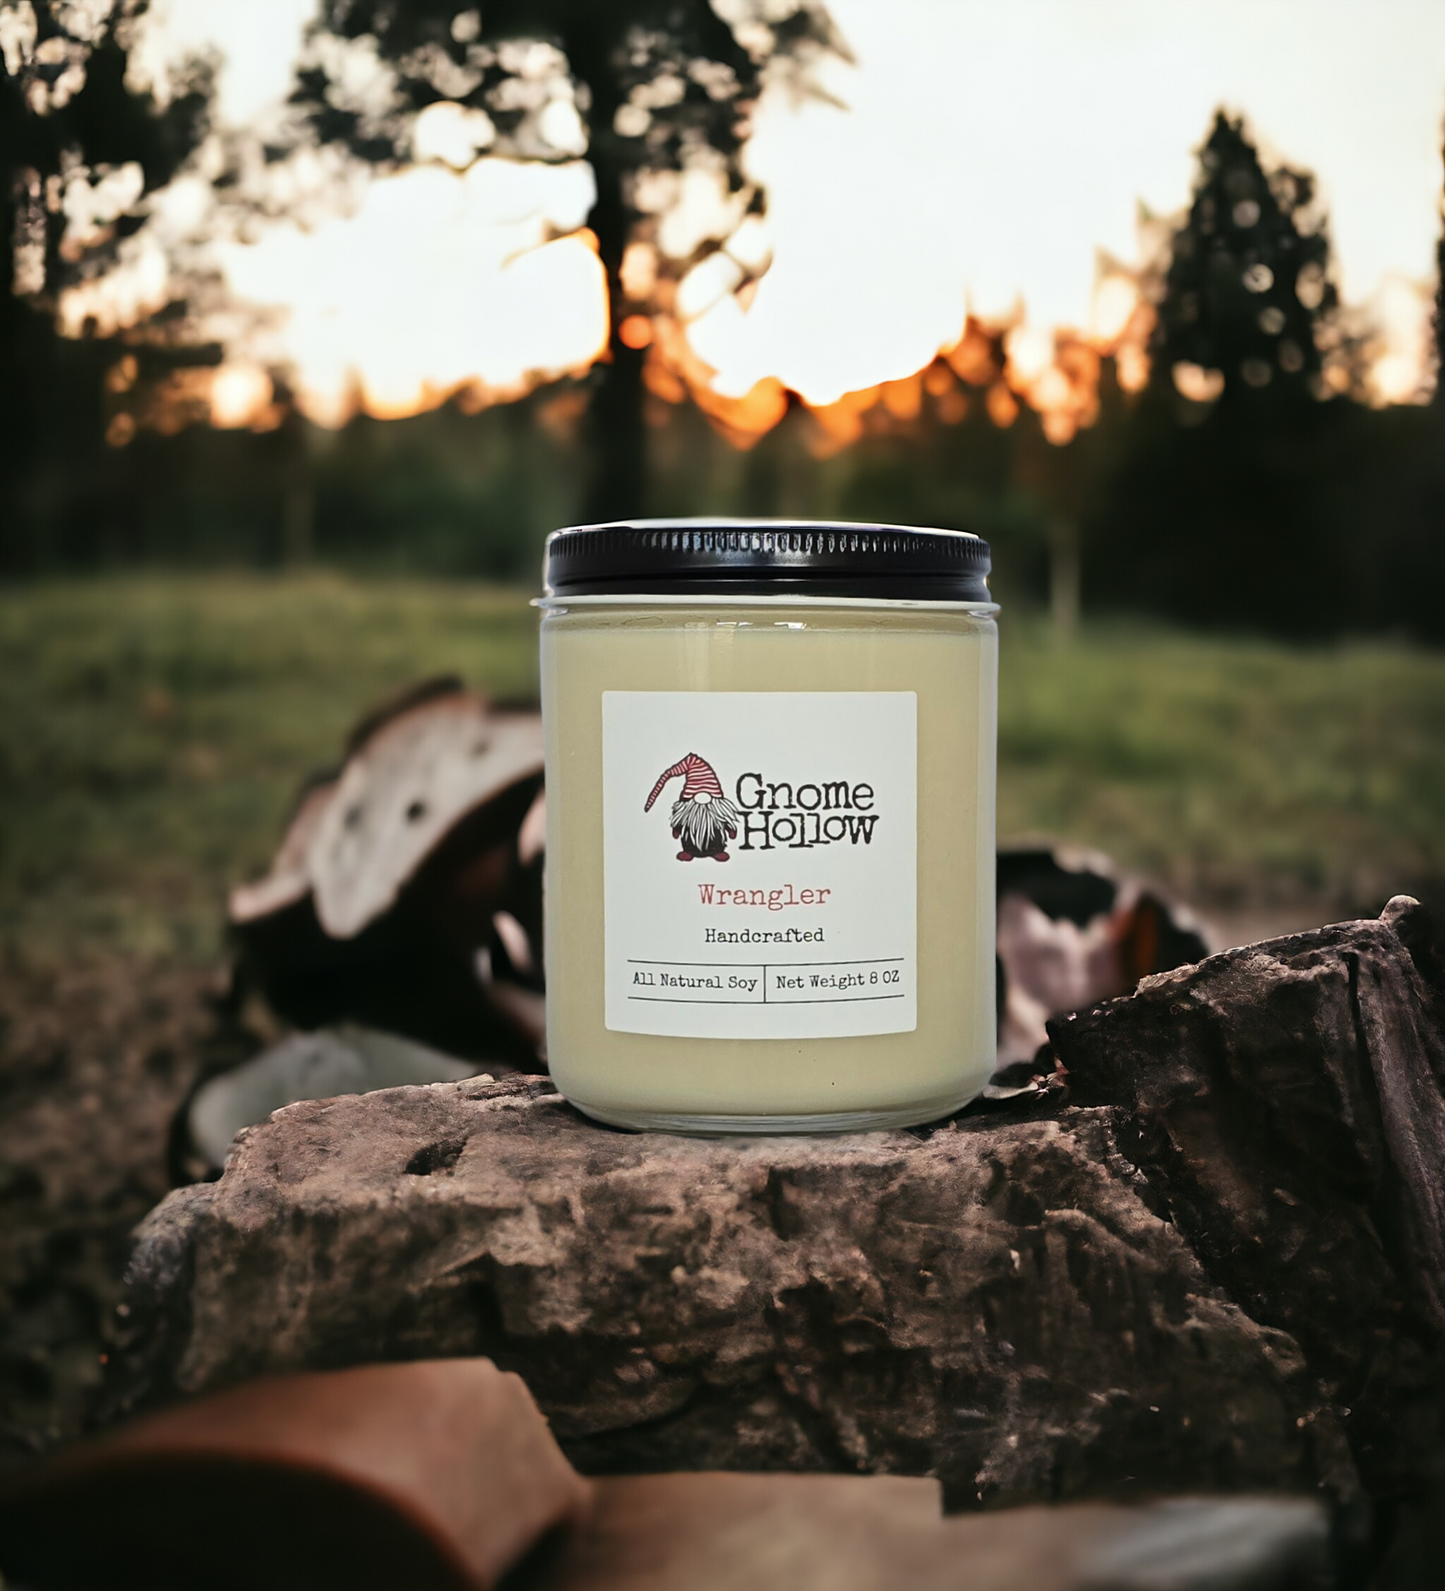 Wrangler Scented Soy Candle